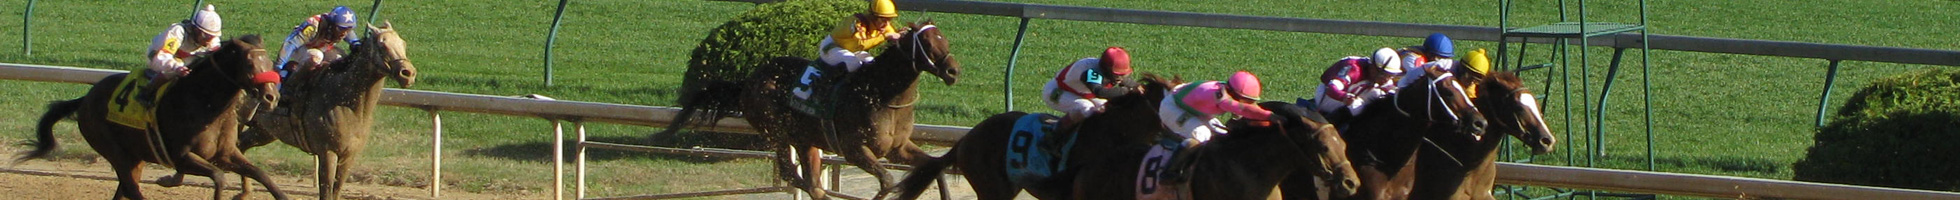 The Preakness